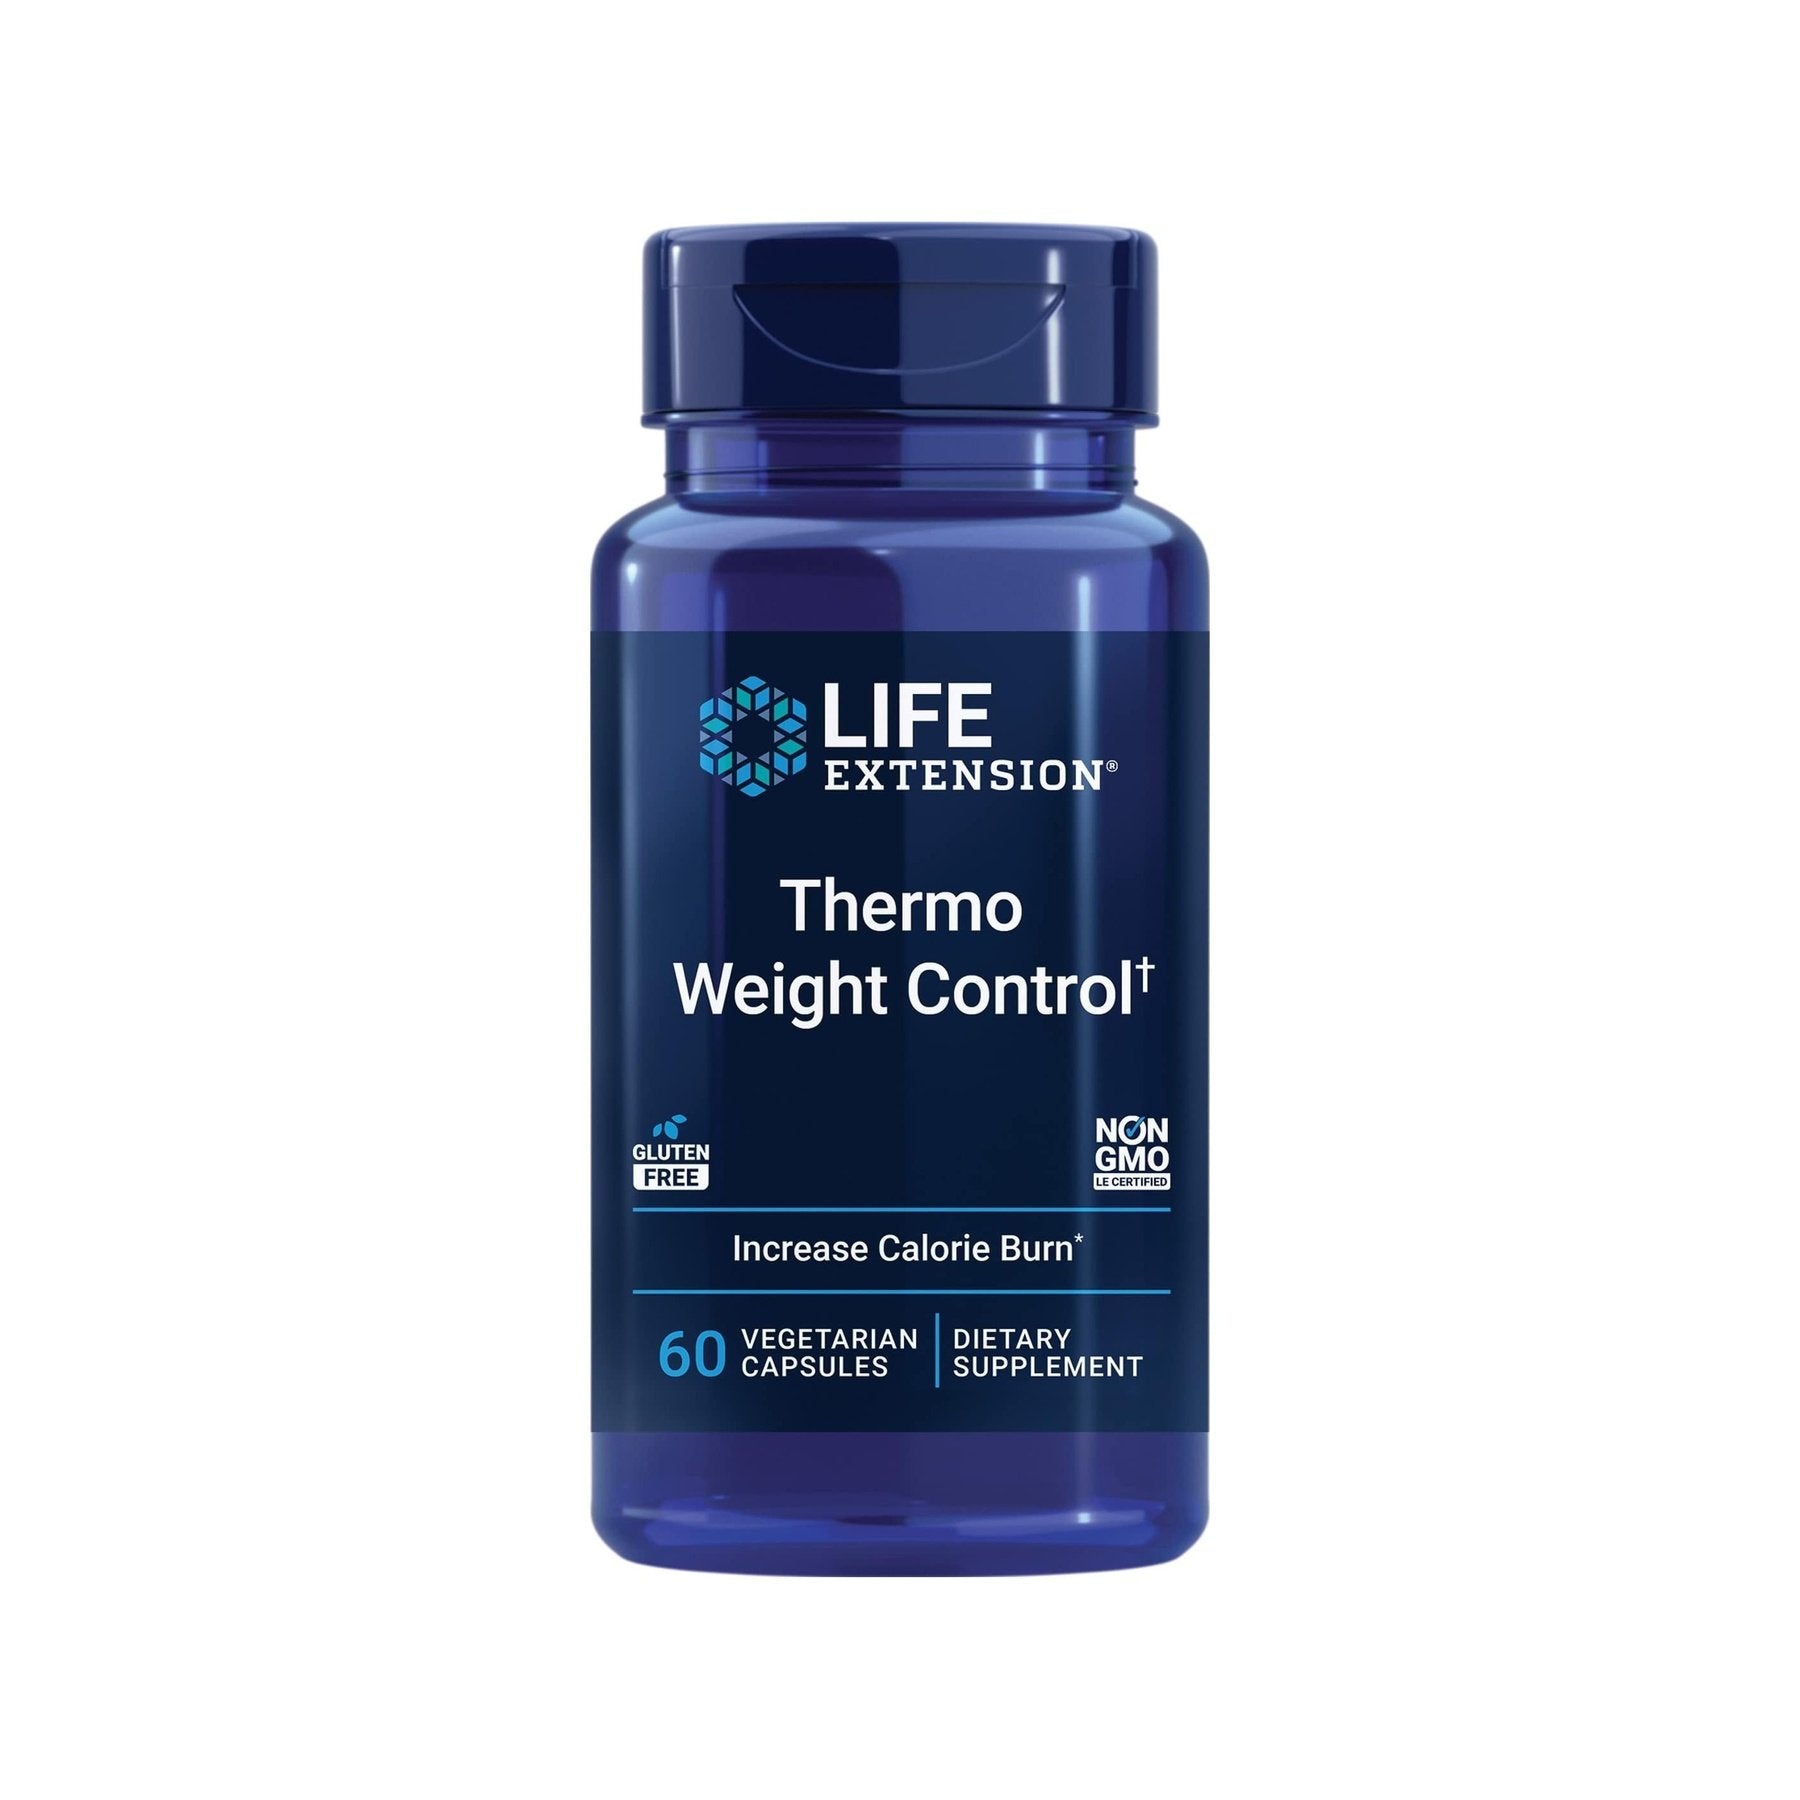 Life Extension Thermo Weight Control - Encourages Fat Burning, Healthy Weight Loss &amp; Thermogenesis - Patented Capsaicin Extract - Weight Management - Gluten-Free - 60 Vegetarian Capsules